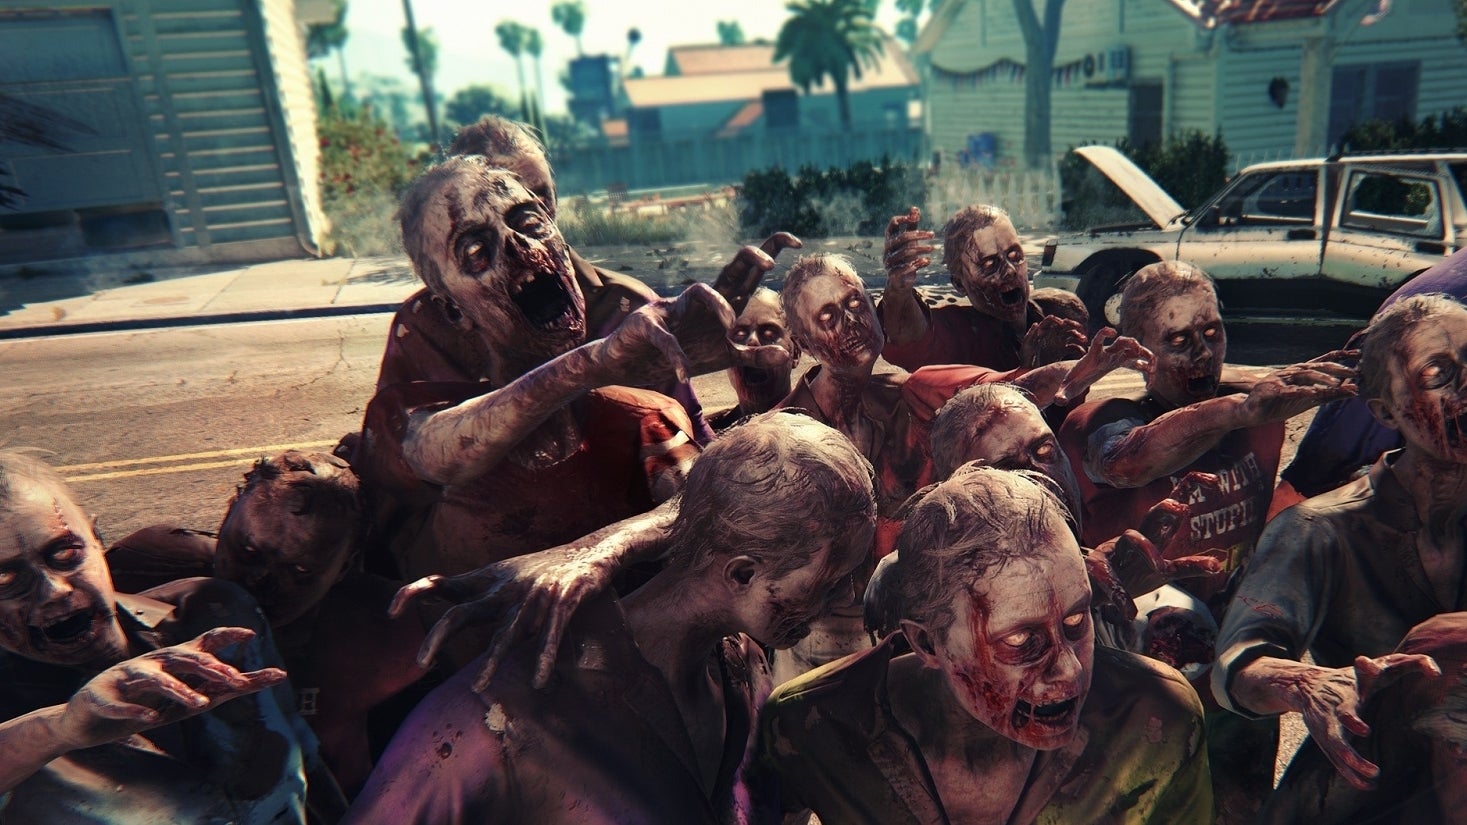 Image for Yes, Dead Island 2 is still alive and it's going to be a "kick-ass zombie game"